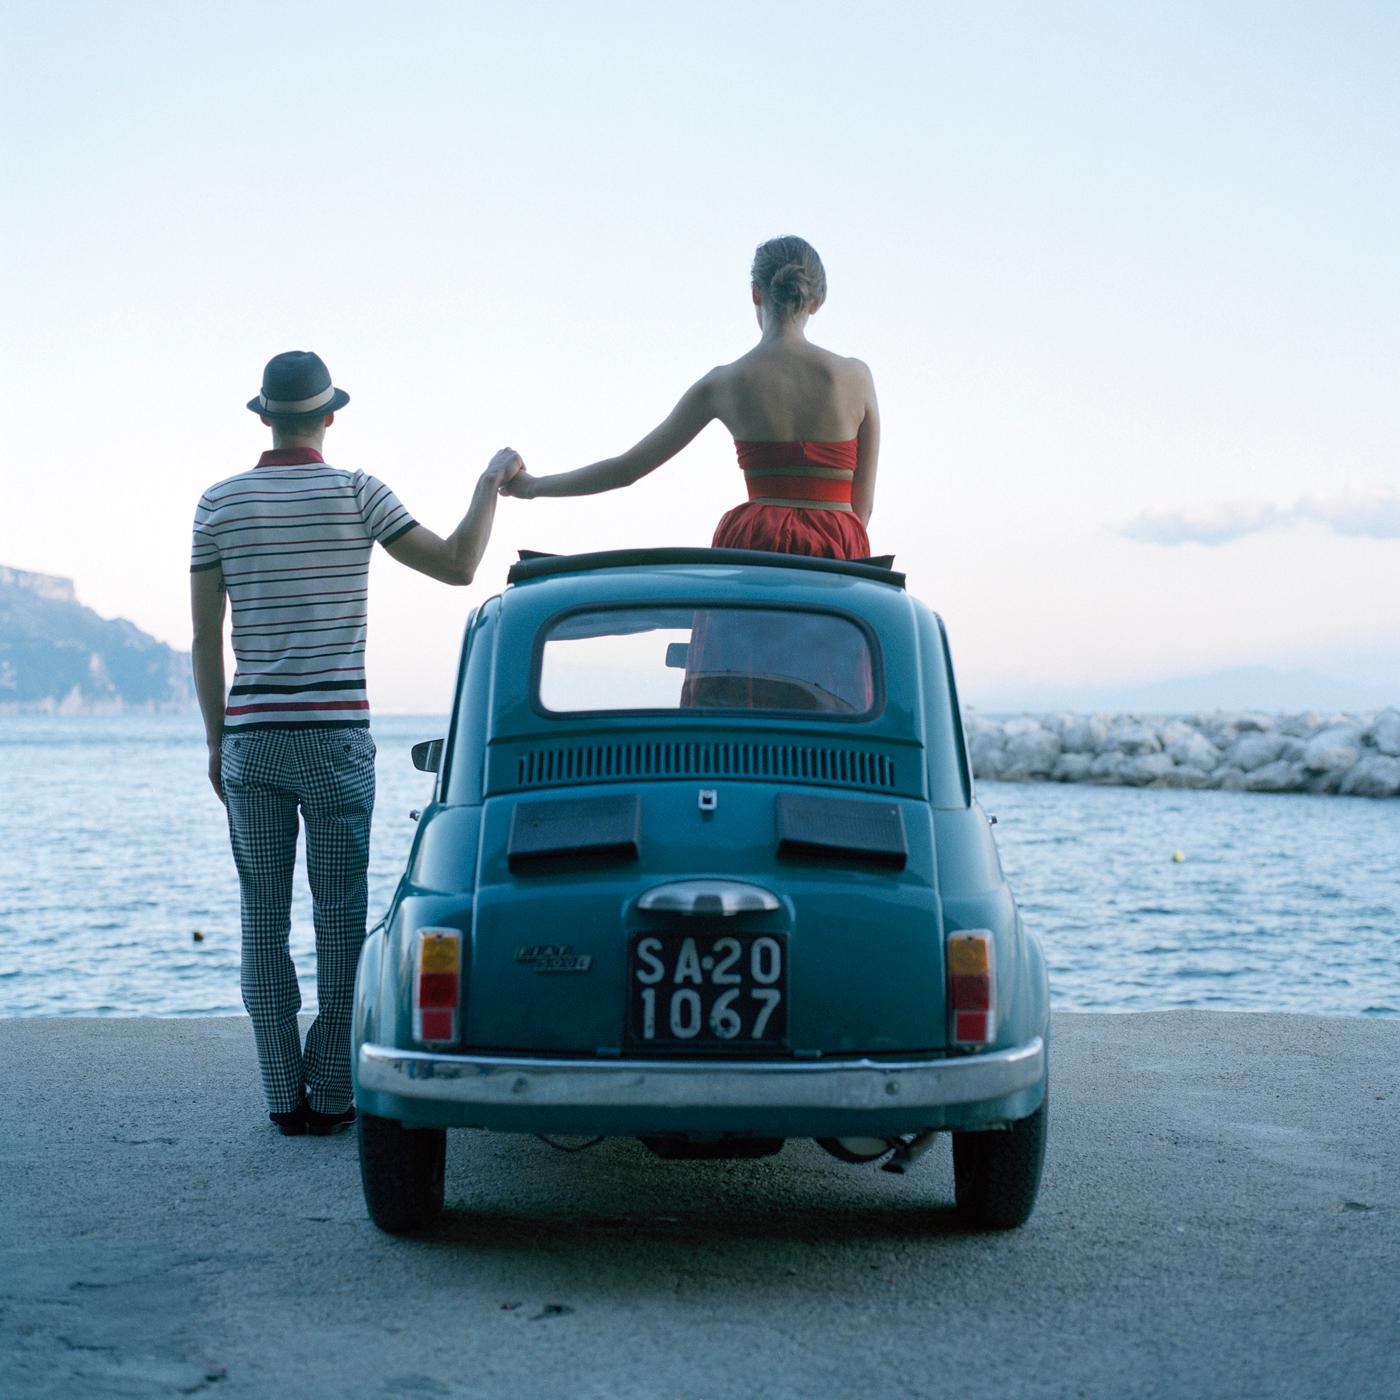 Framed in white this estate print by Rodney Smith was shot on the Amalfi Coast in Italy and has a charming sense of adventure. 
Image size:40 x 40 inches
Framed Size: 49.5 x 49.5 inches

 Each image is part of an edition of 25. Price increases as